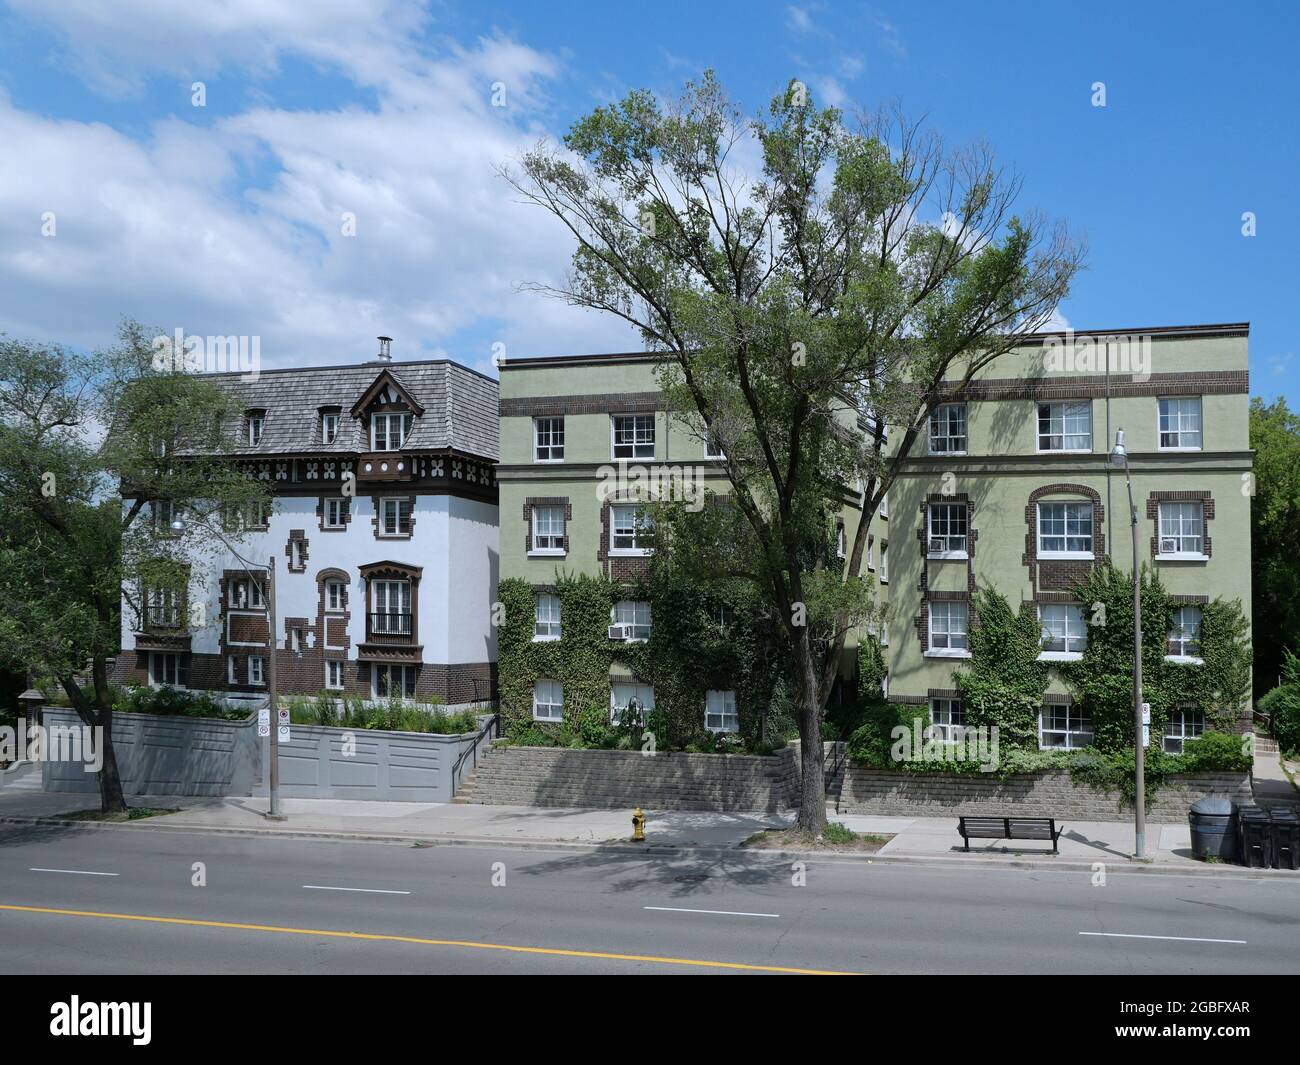 Old style small low rise apartment buildings on a main street, covered in vines Stock Photo